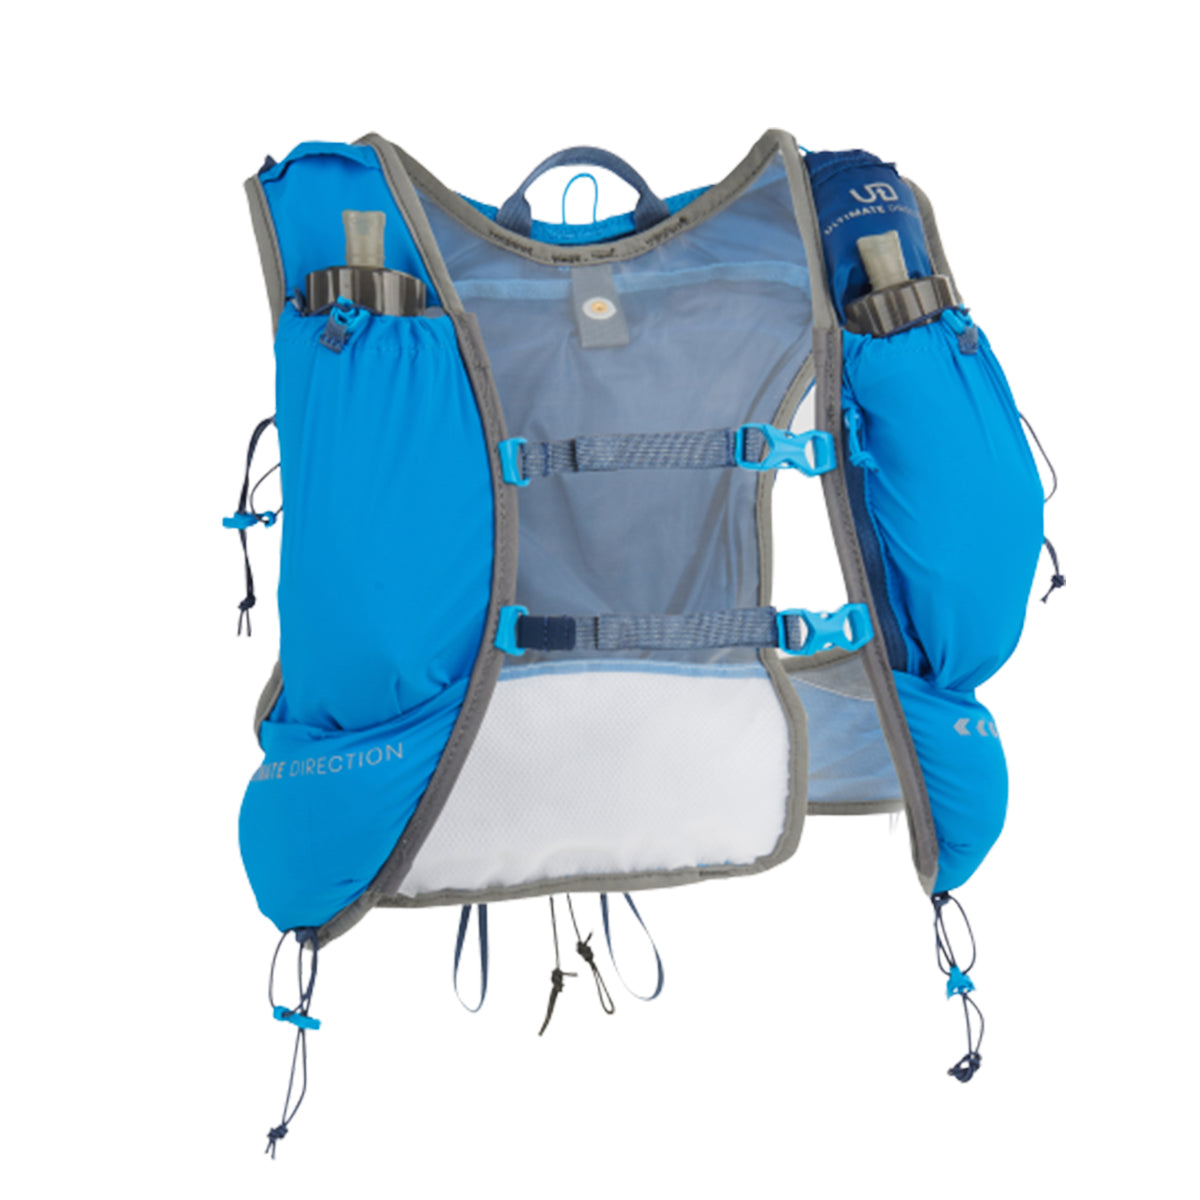 ULTIMATE DIRECTION Ultimate Direction Mountain Vest 6 Men's